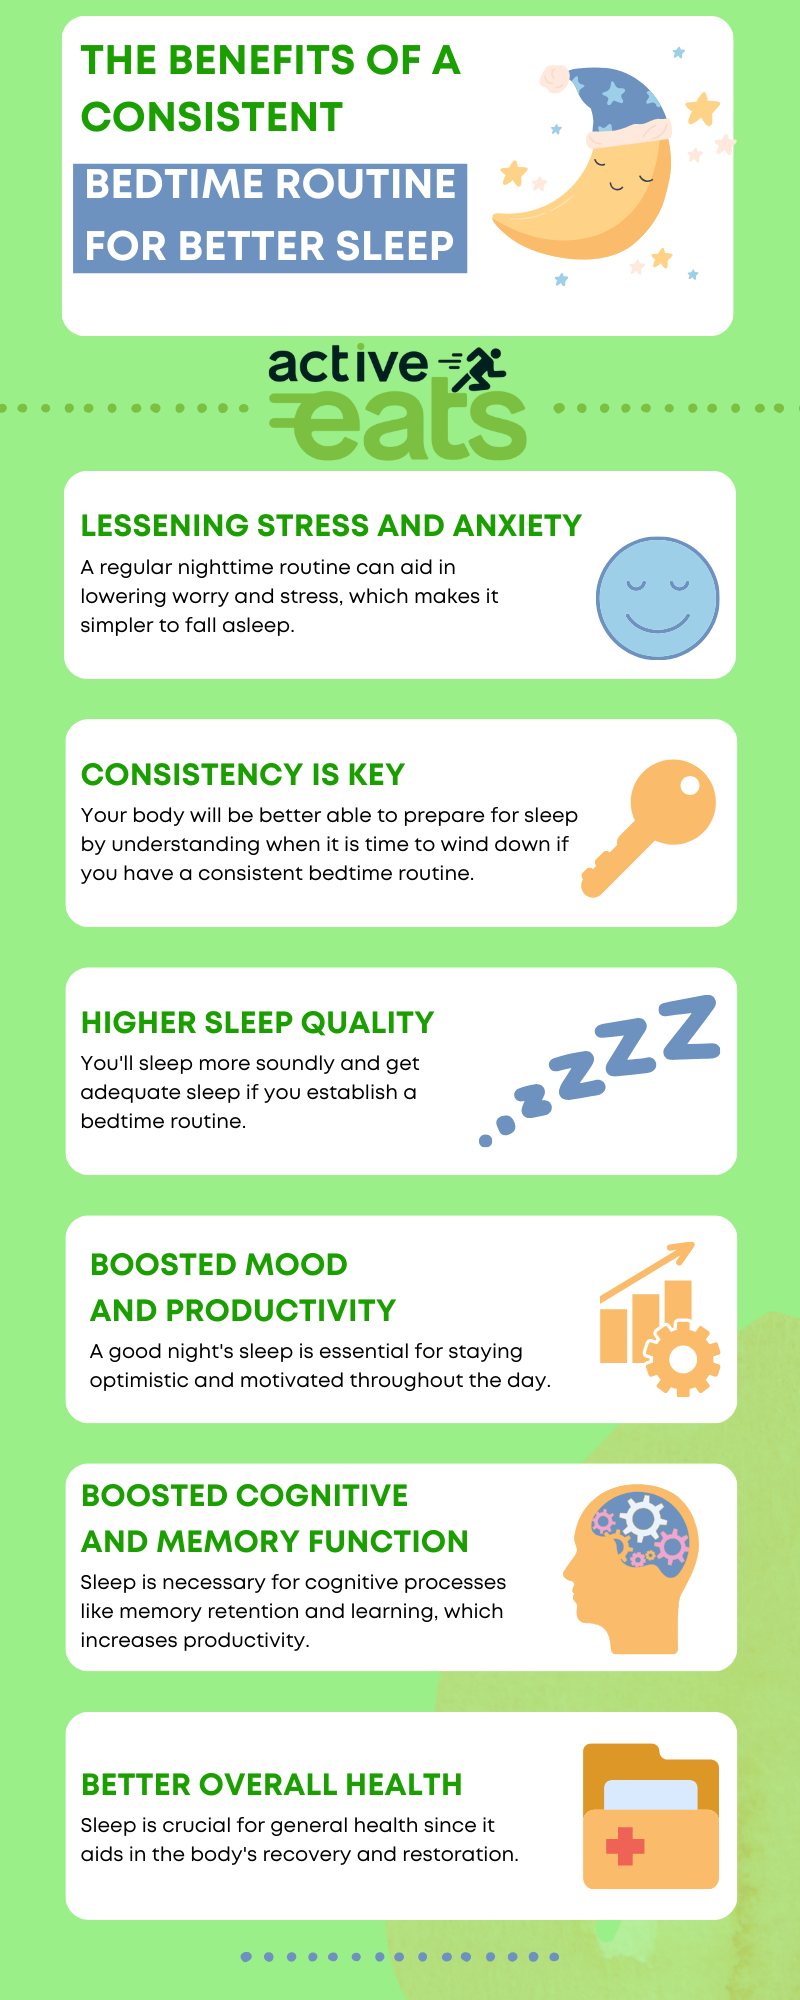 A bedtime routine offers various benefits, including improved sleep quality, reduced stress, and anxiety. It helps regulate sleep patterns and can be particularly important for children, instilling a sense of security and structure. Such routines can enhance family bonding and establish healthy sleep habits, contributing to overall well-being.